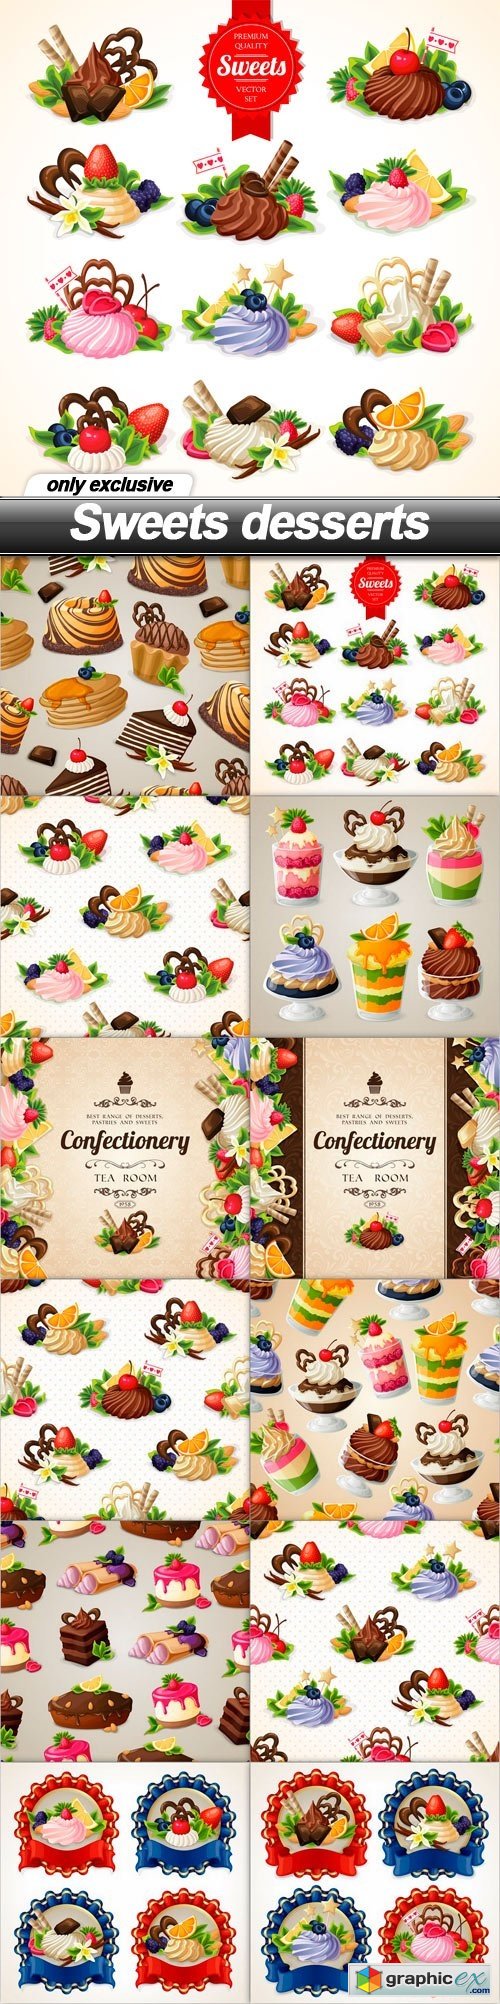 Sweets desserts - 12 EPS